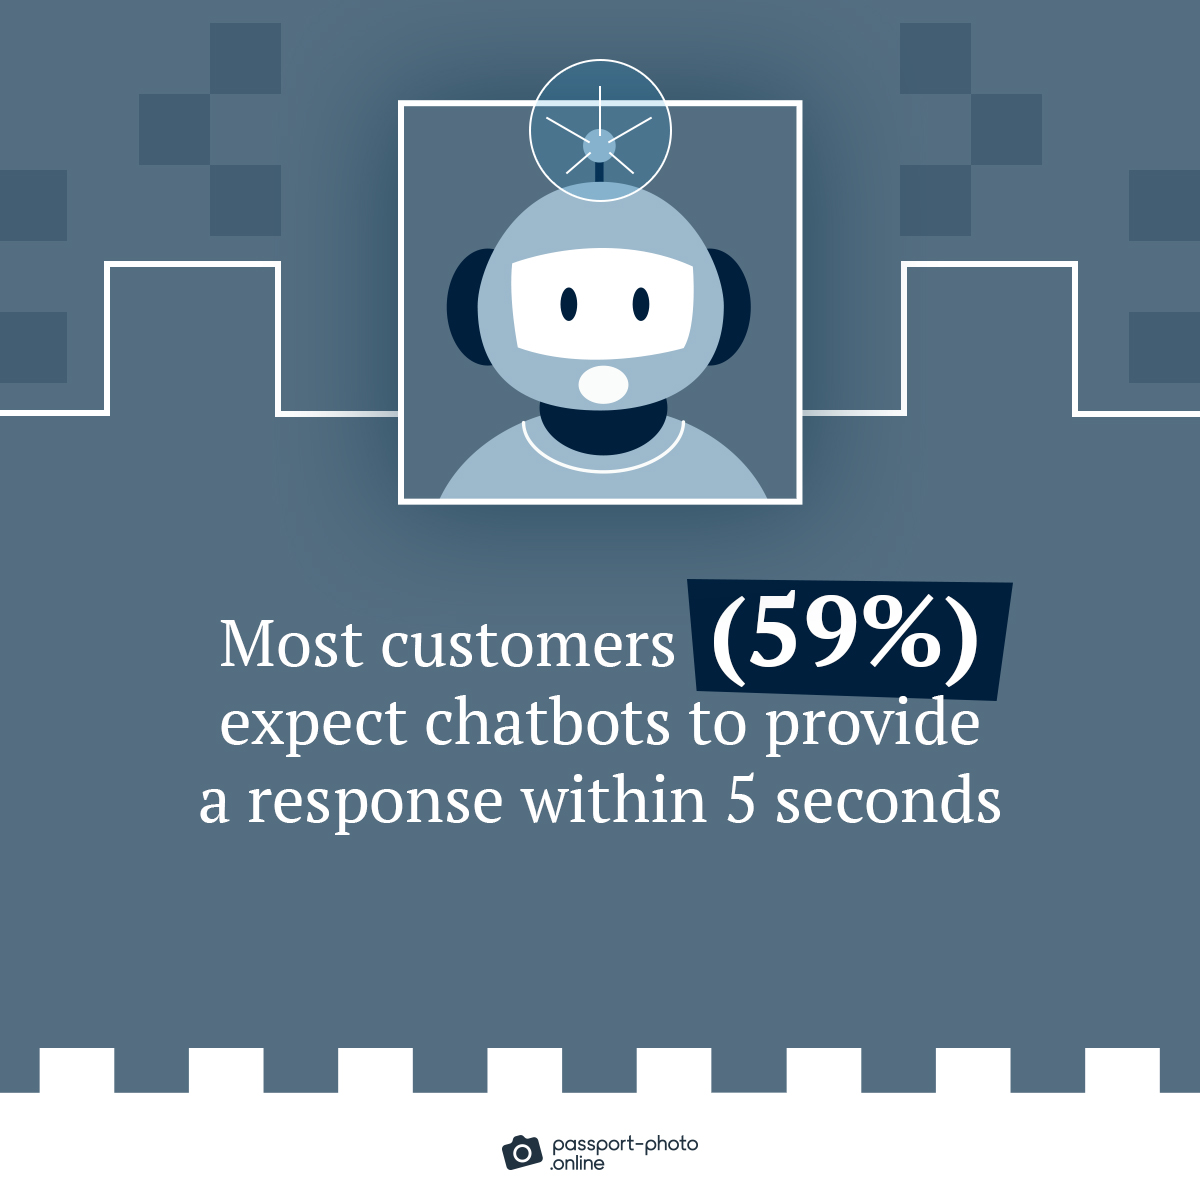 59% of consumers expect chatbots to respond within five seconds